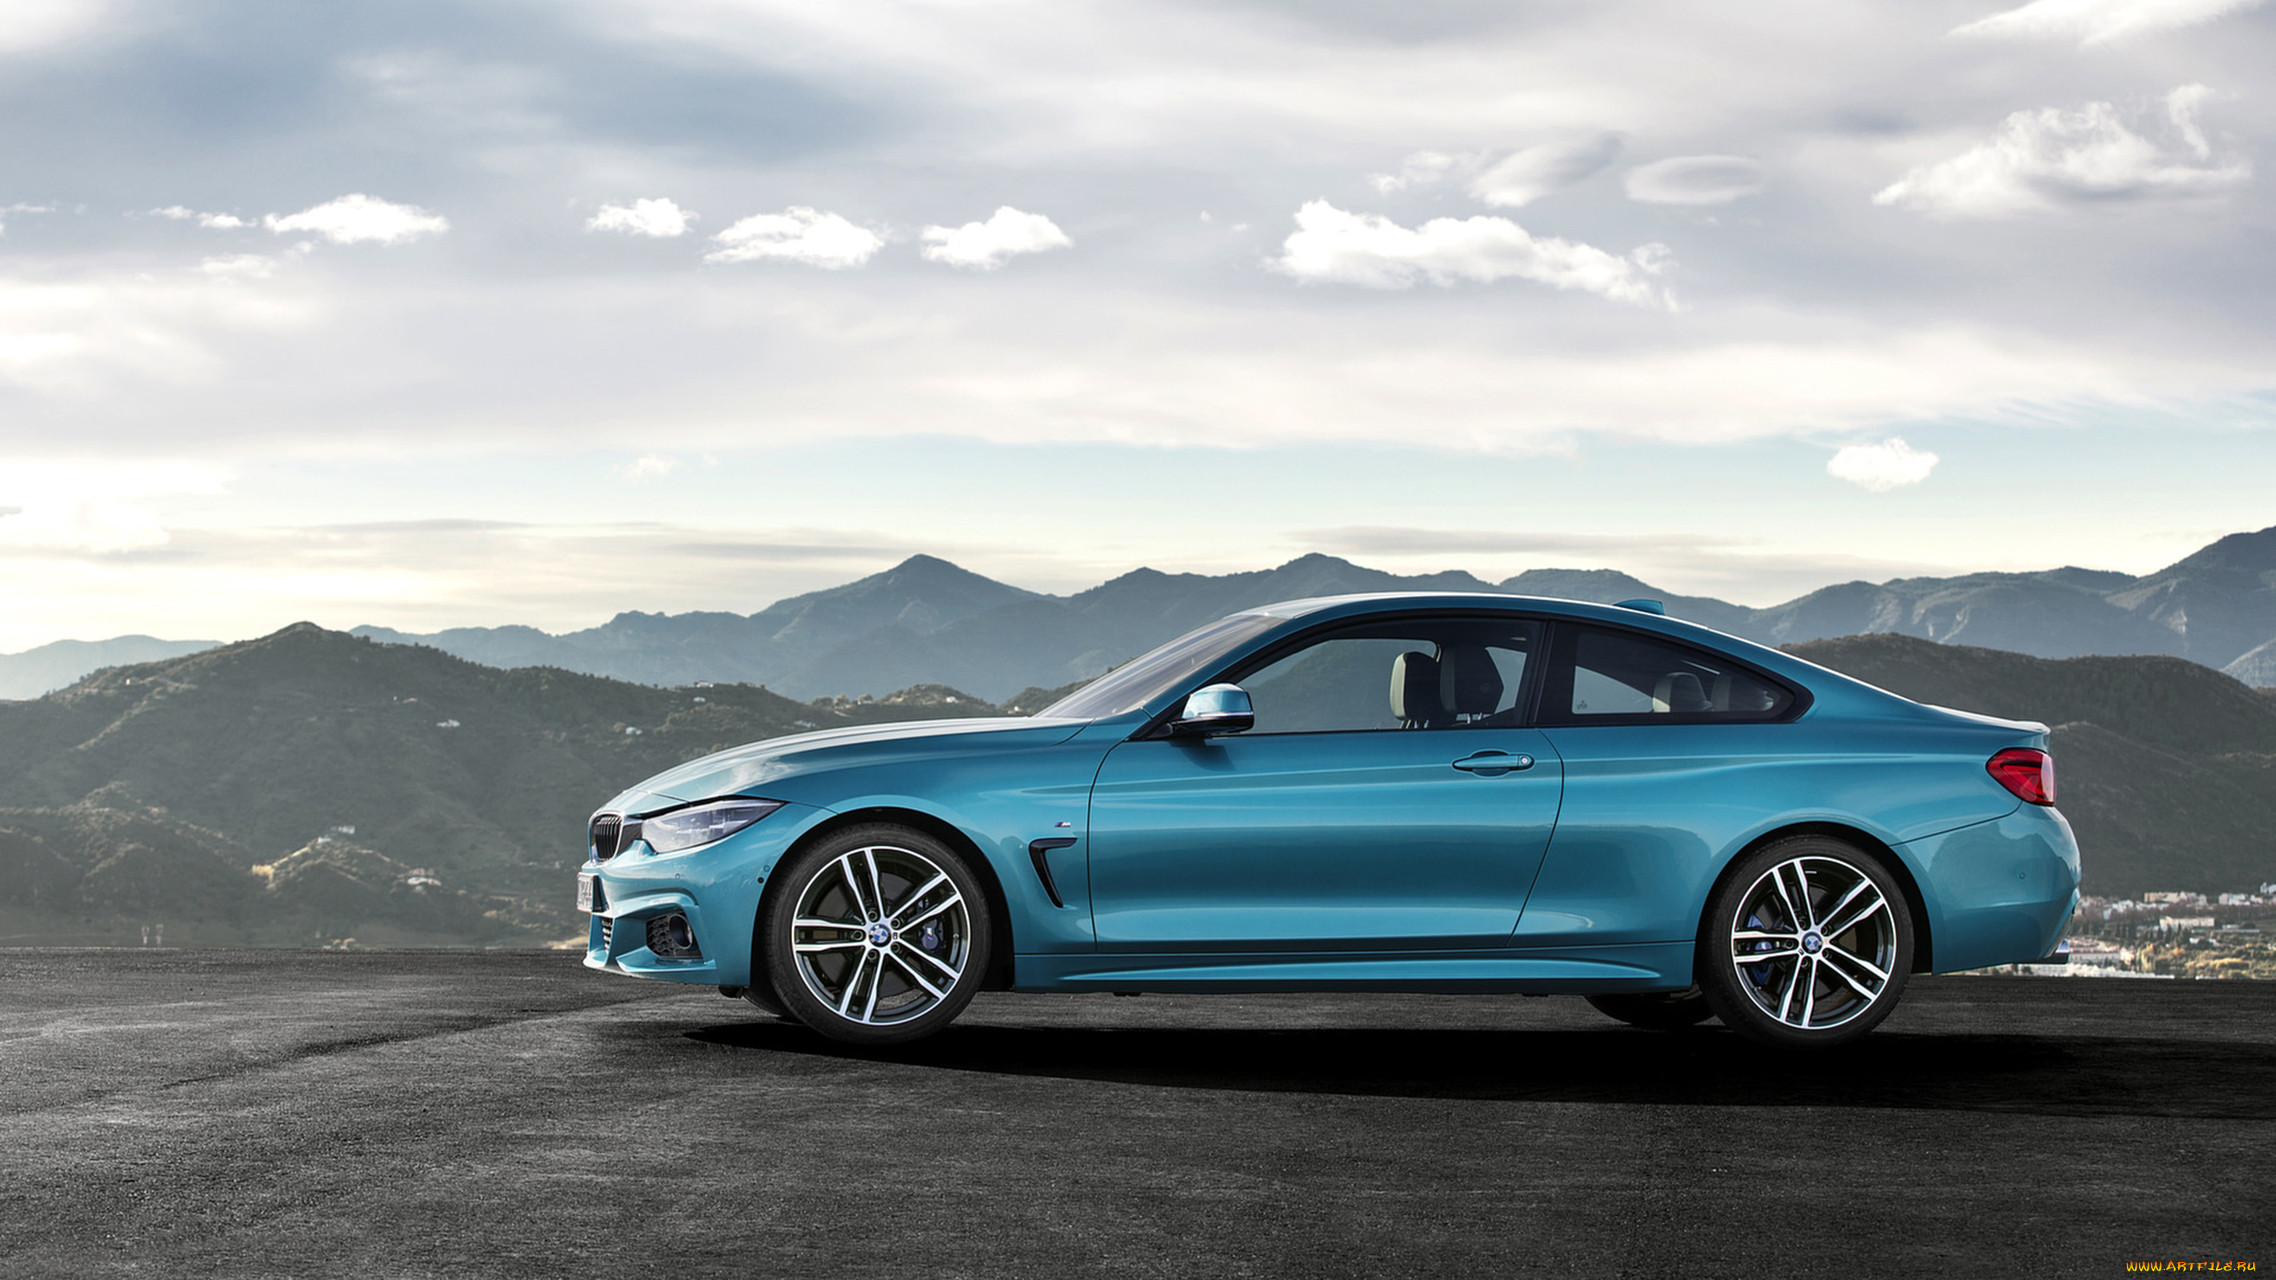 bmw 4 series coupe m sport 2018, , bmw, 2018, sport, m, coupe, series, 4